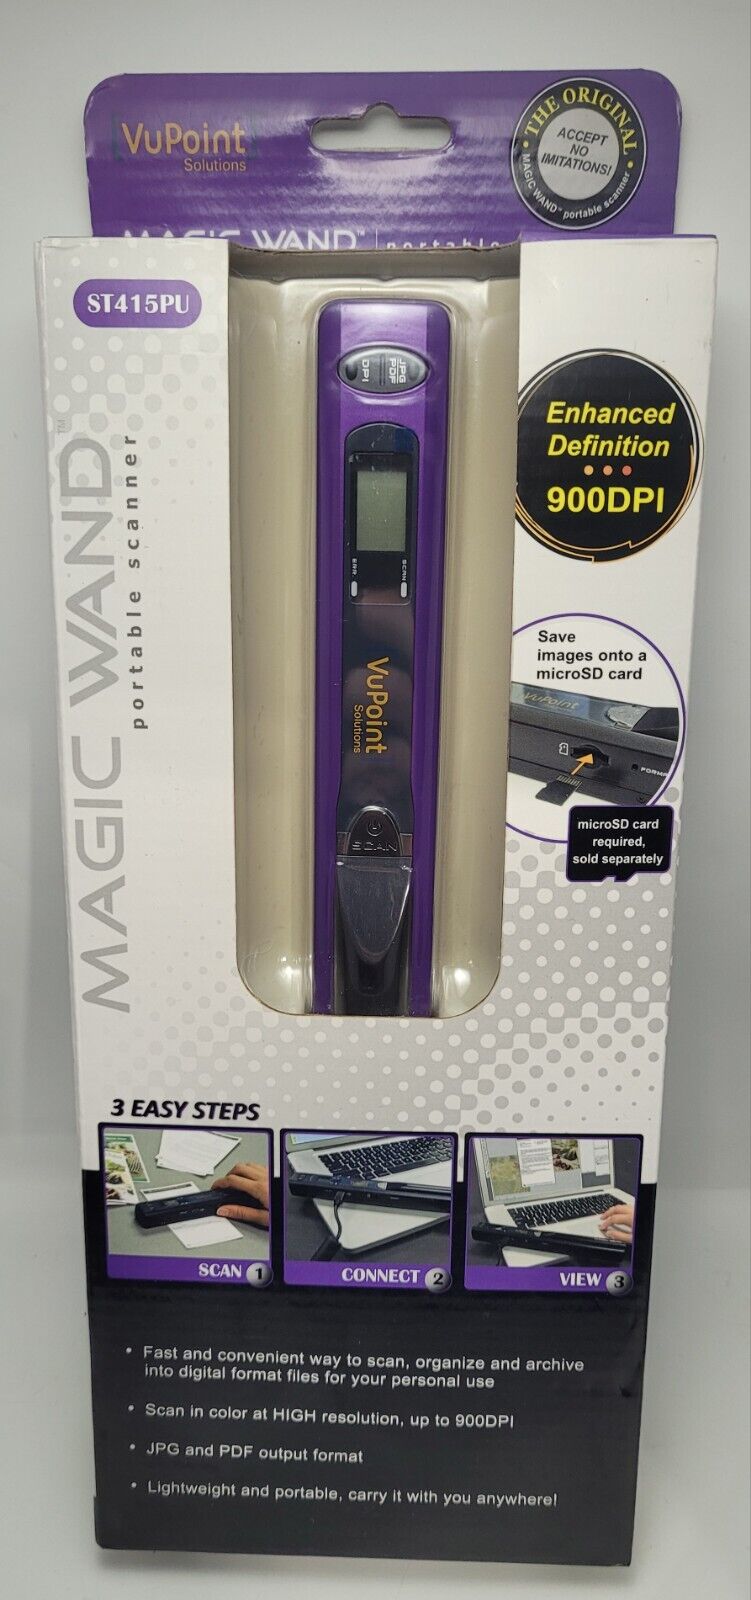 VuPoint ST415 Handheld Scanner Magic Wand Portable OCR 600 DPI New Sealed